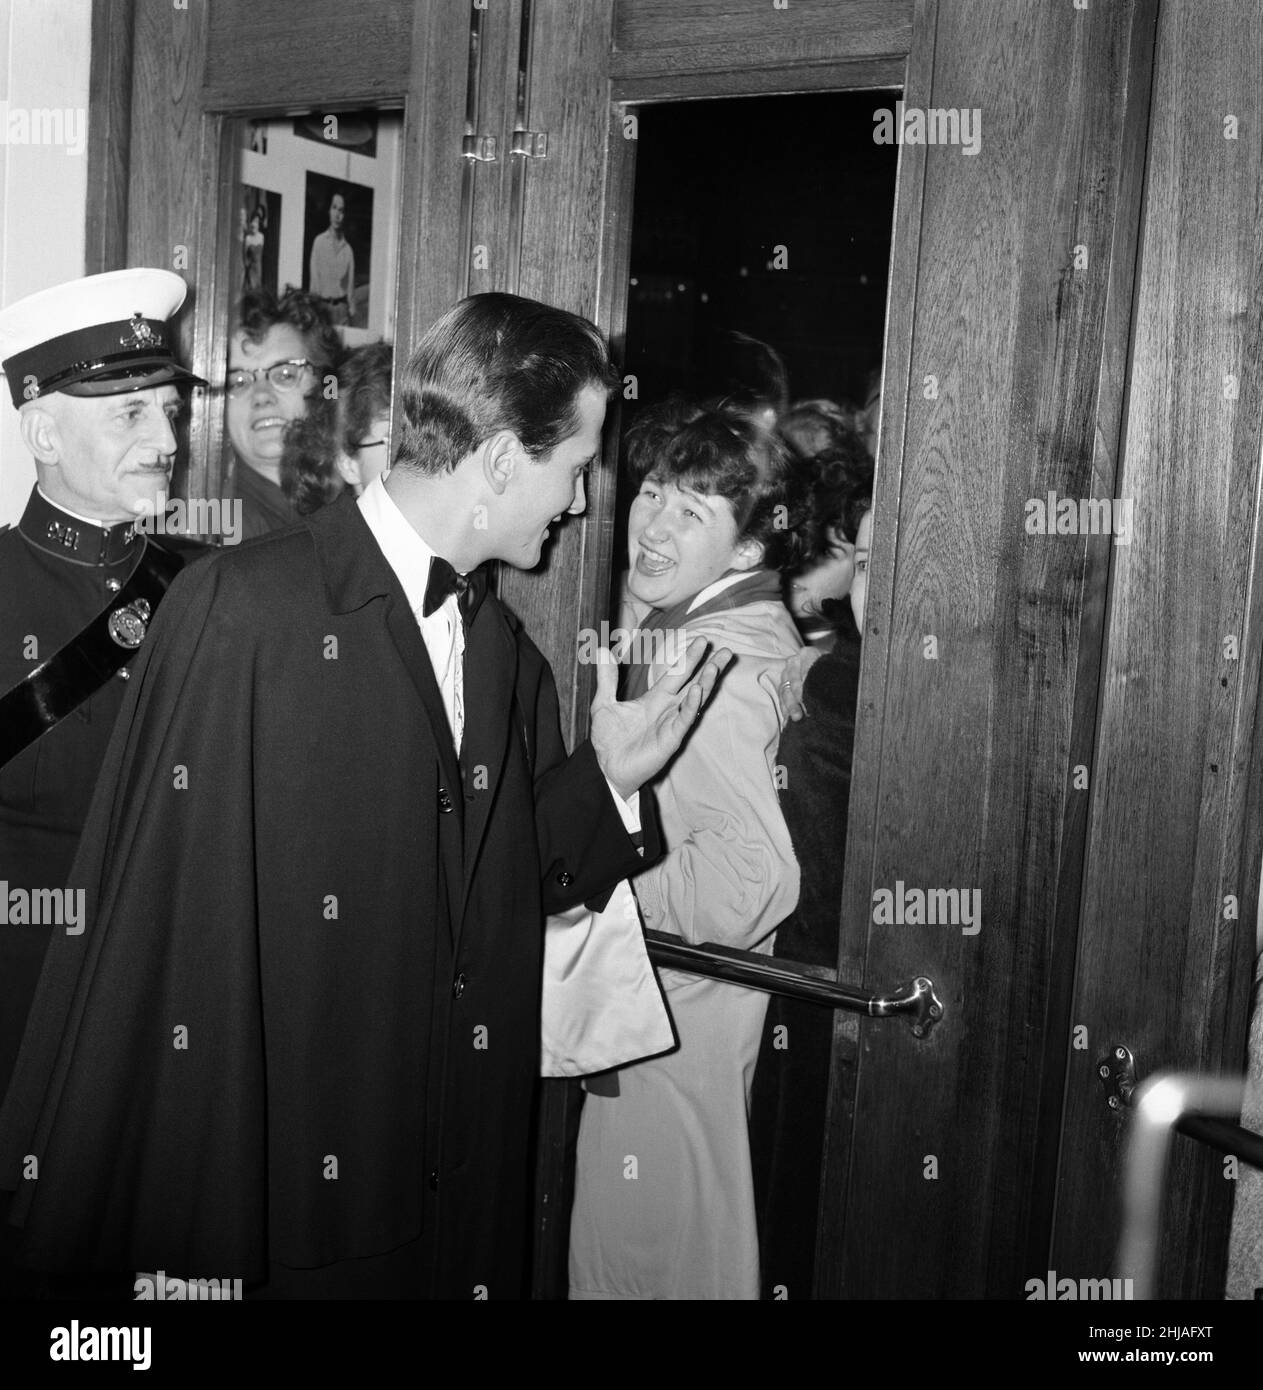 The world premier of  'The Main Attraction' at the Plaza, Piccadilly, which stars Pat Boone and Nancy Kwan. Pictured, Pat Boone waving to fans through the door of the theatre. 25th October 1962. Stock Photo